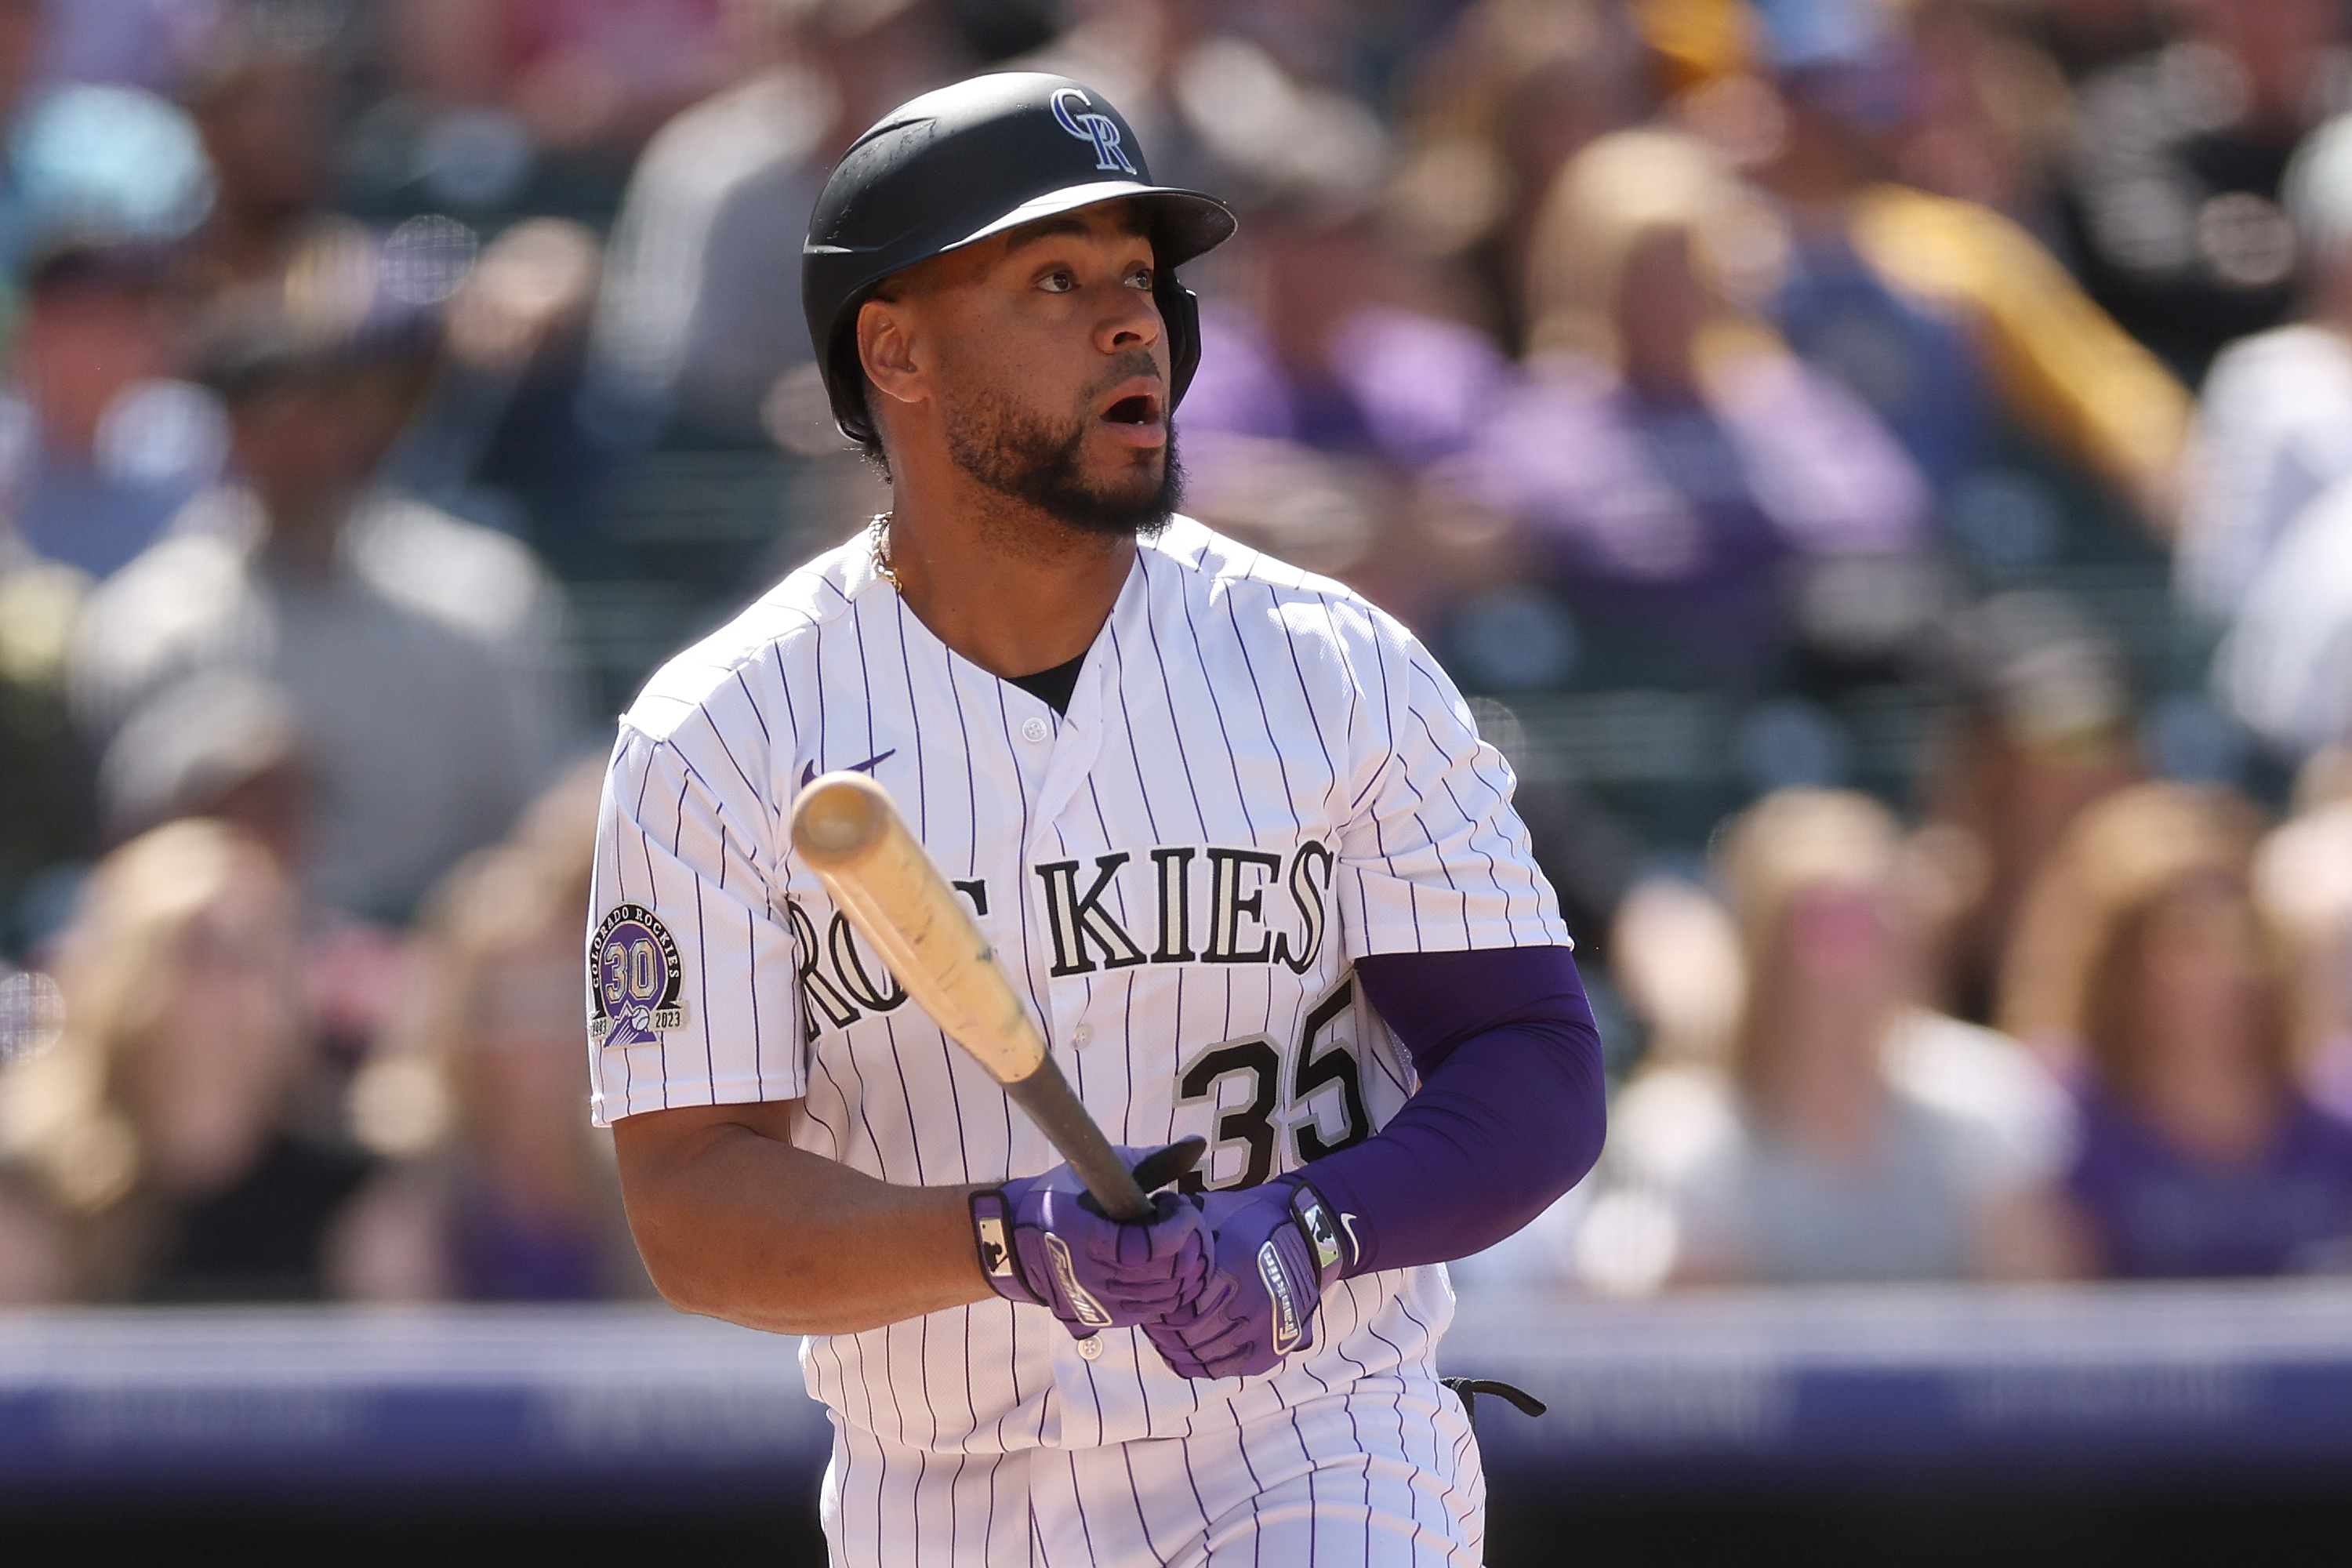 Here to help: Rockies catcher Elias Diaz extends a hand to his